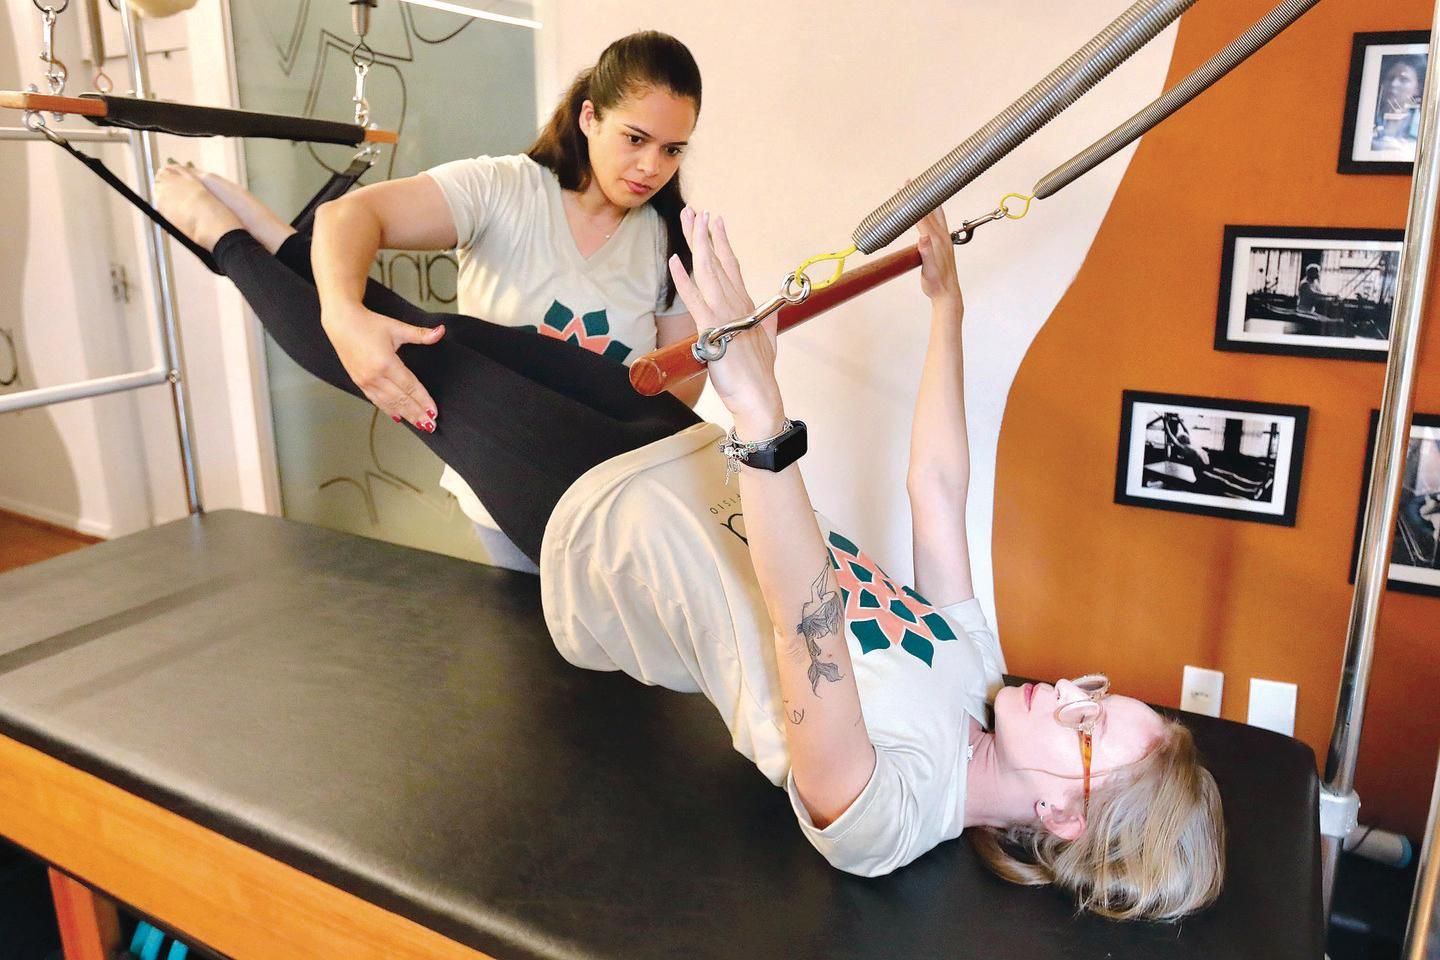 Plus-Size and over 40 Pilates Reformer – Reality Pilates Reformer